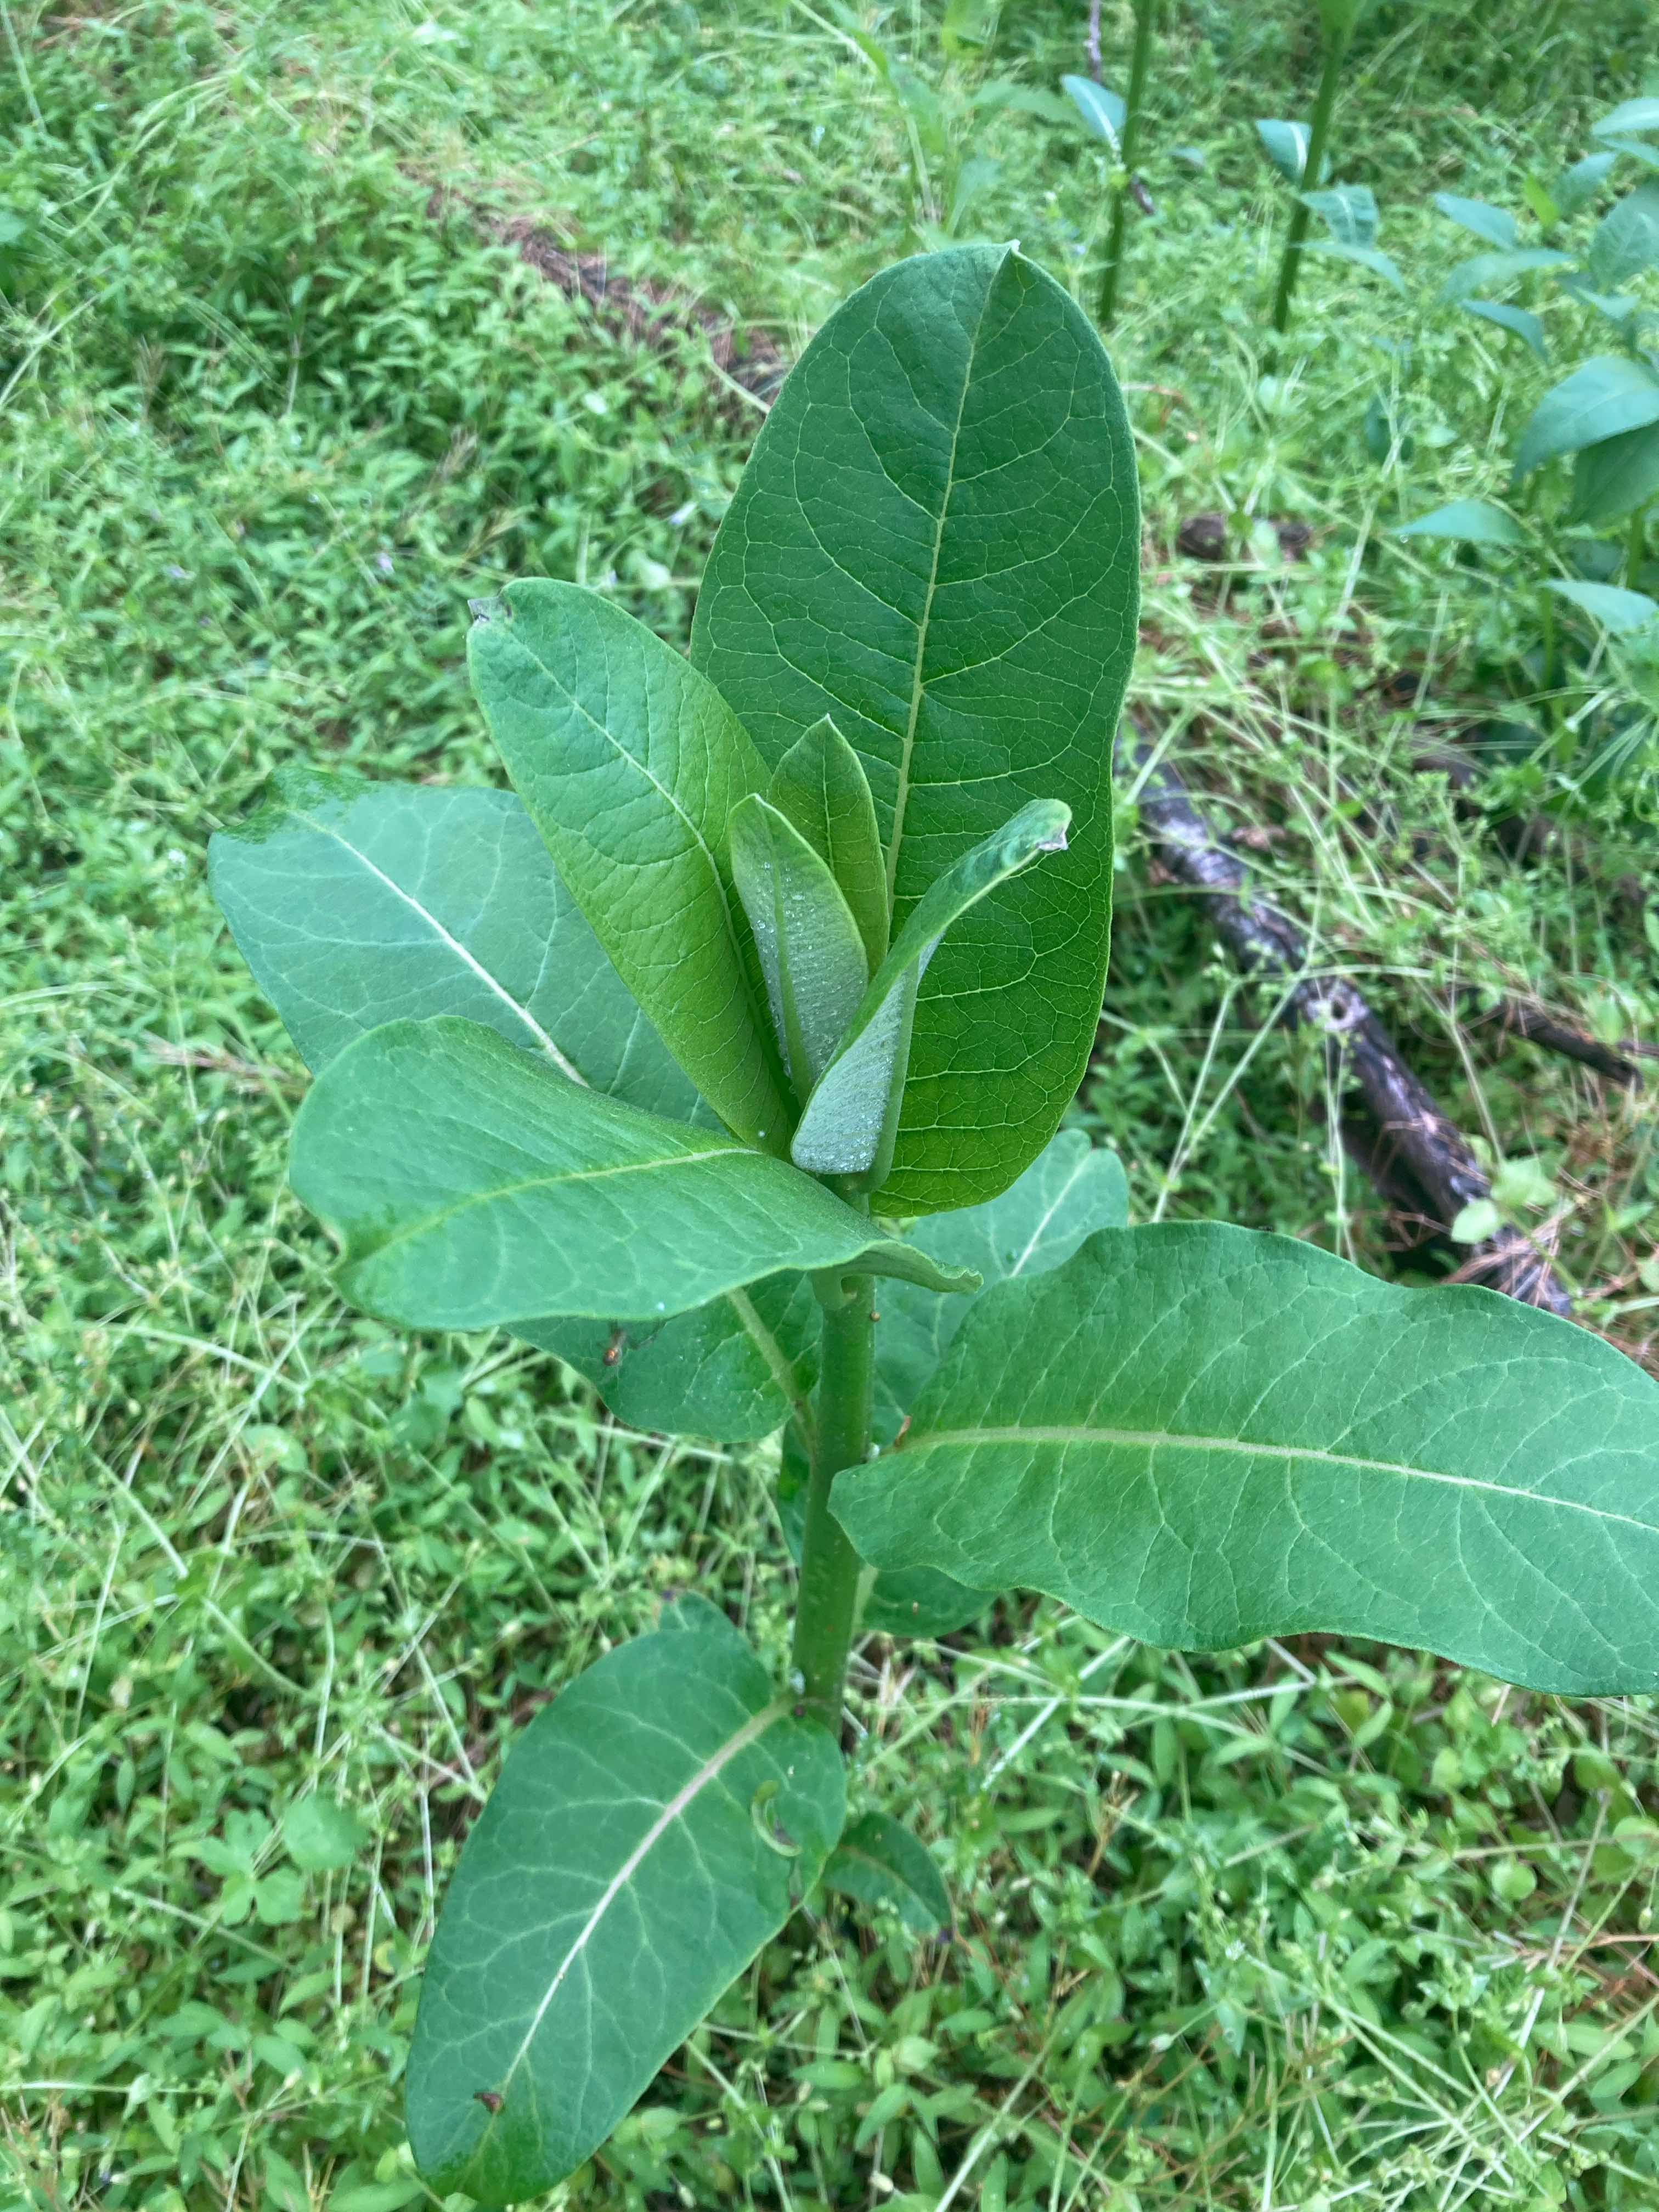 The Scientific Name is Asclepias syriaca. You will likely hear them called Common Milkweed. This picture shows the Plant emerging in the Spring. A hefty plant with a thick stem and large elliptical-shaped, thick leaves. All parts of the plant contain white sap. of Asclepias syriaca